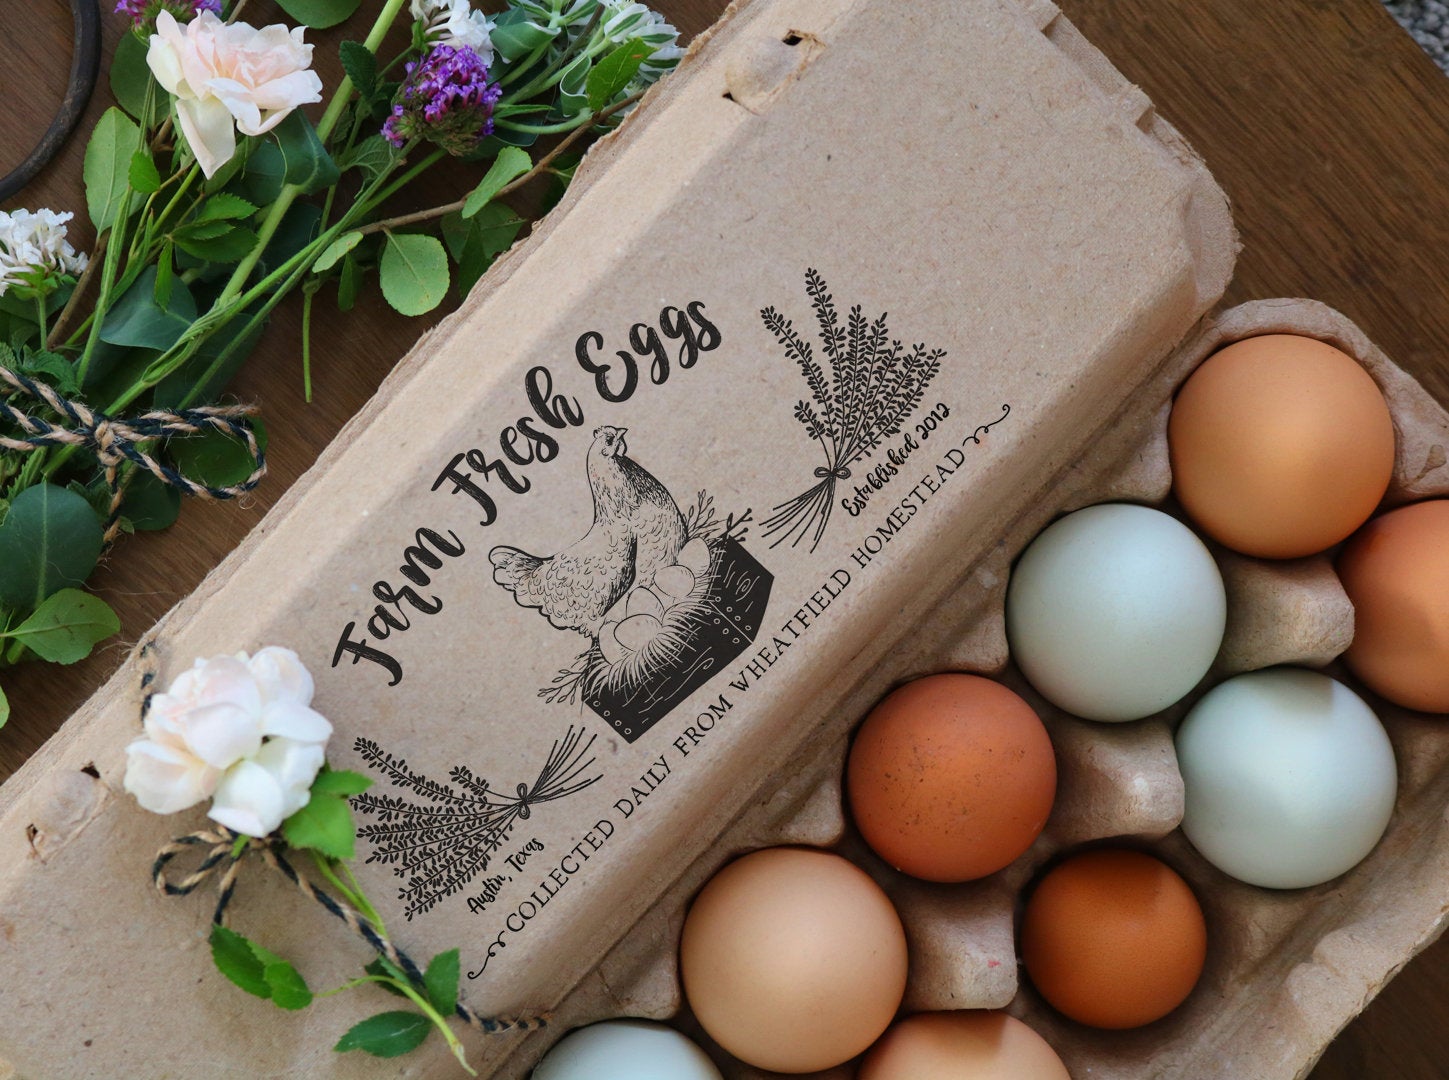  Egg Stamp for Fresh Eggs Personalized Stamps Eggs Custom  Chicken Egg Carton Stamp Add Your Own Farm Name for Homegrown Eggs and  Kitchen Creations Fun Gift : Home & Kitchen